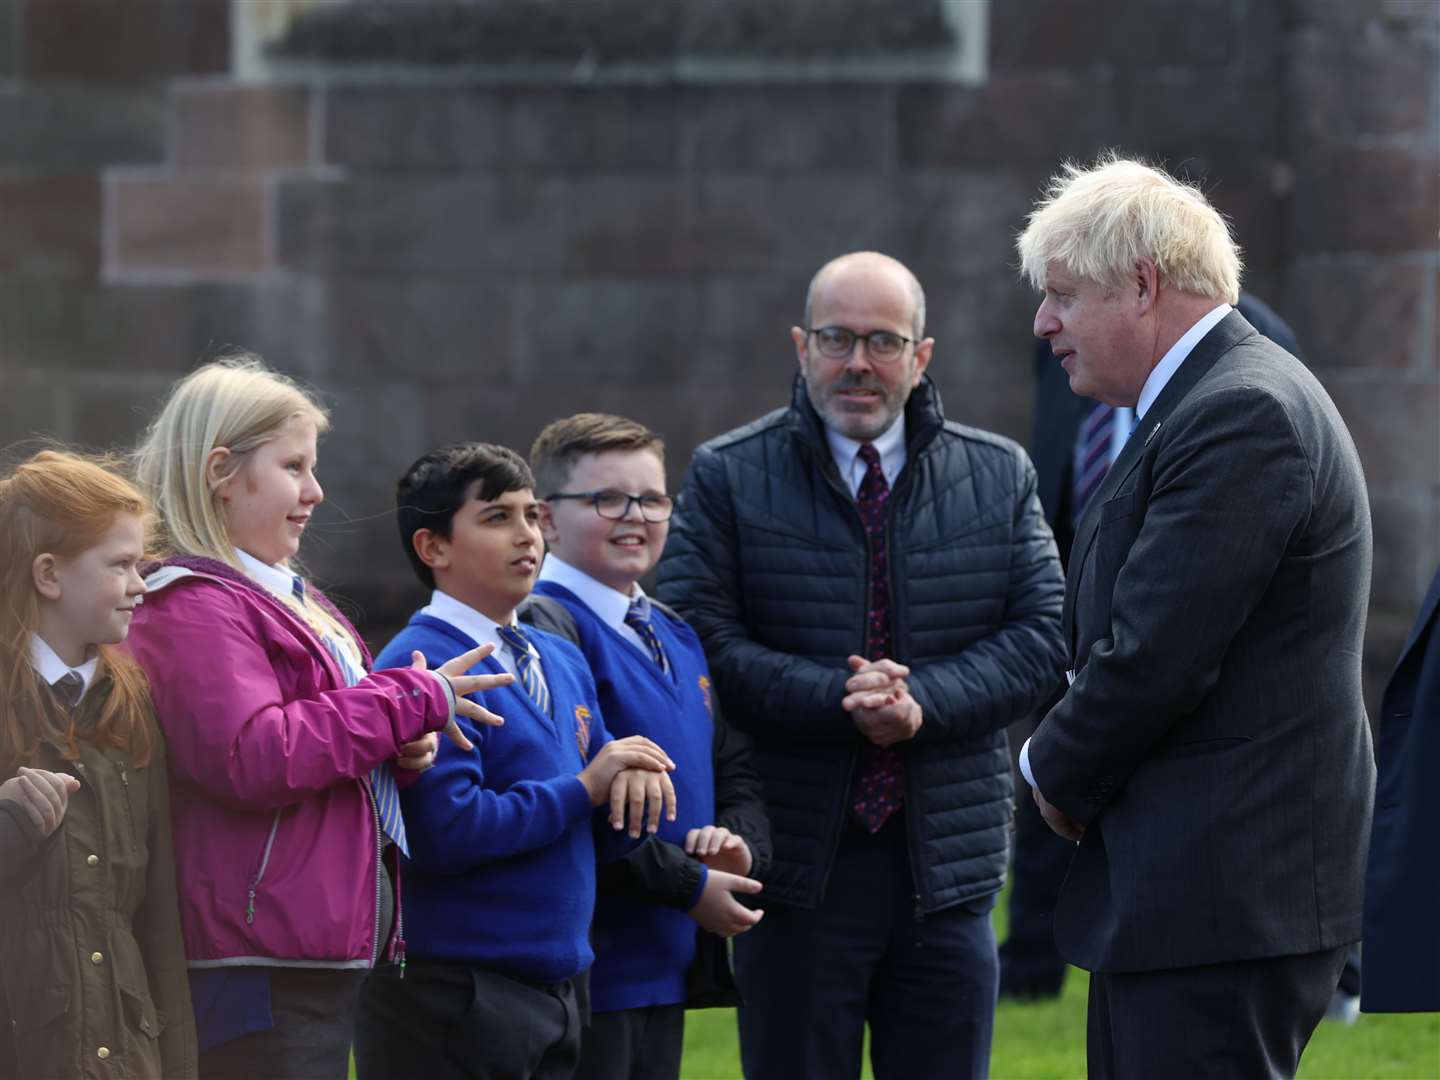 Prime Minister Boris Johnson (left) talks to children after a service to mark the centenary of Northern Ireland at St Patrick’s Cathedral in Armagh (Liam McBurney/PA)